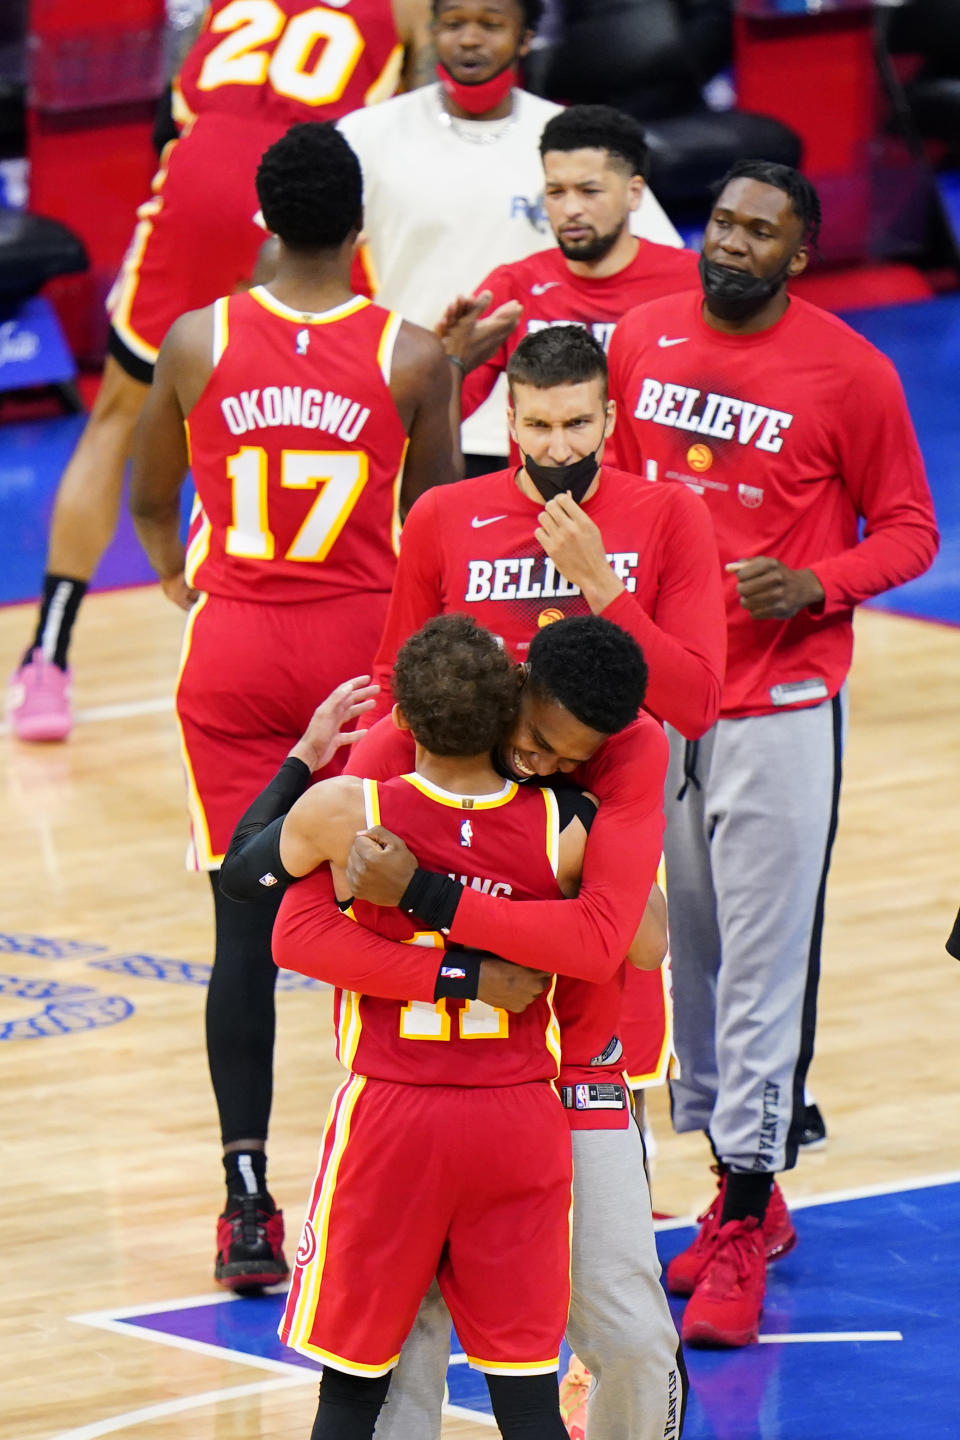 Atlanta Hawks' Trae Young, left, celebrates with teammates after the Hawks won Game 5 in a second-round NBA basketball playoff series against the Philadelphia 76ers, Wednesday, June 16, 2021, in Philadelphia. (AP Photo/Matt Slocum)